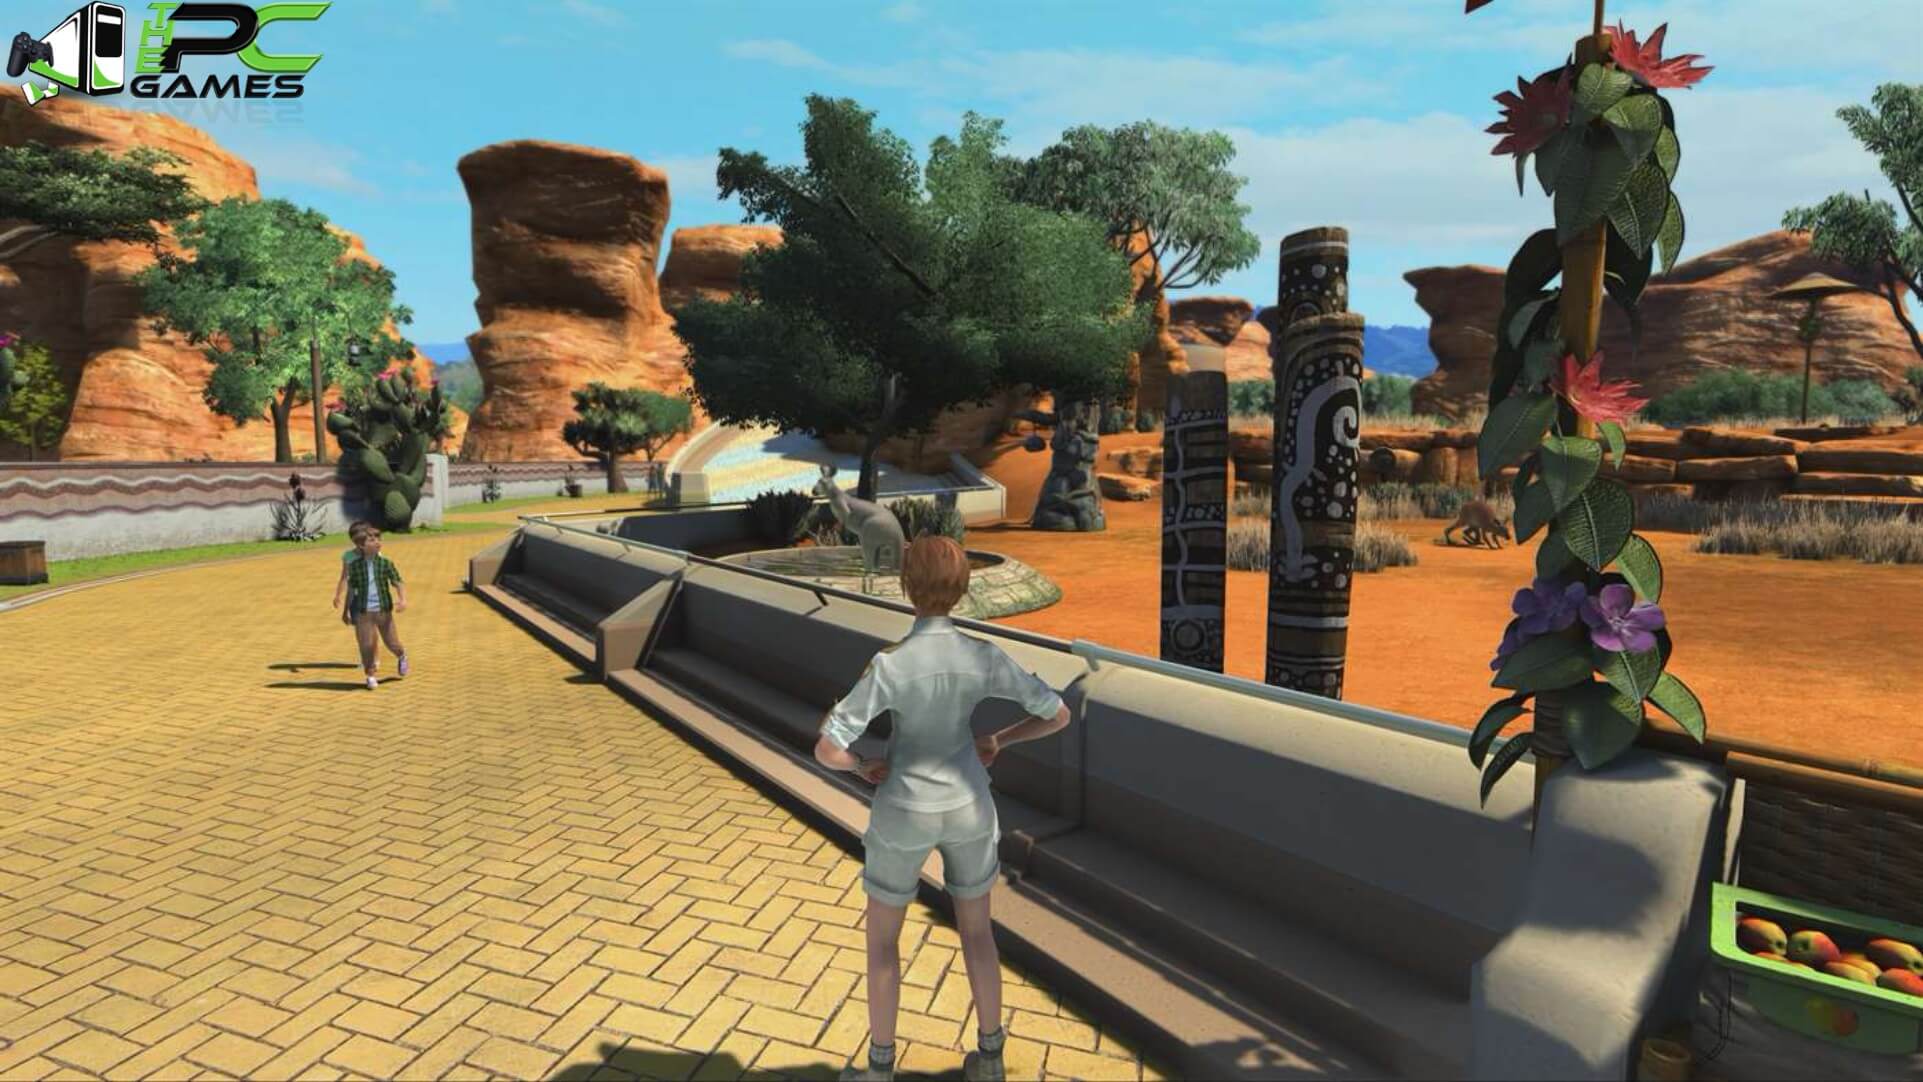 zoo tycoon 2 download links